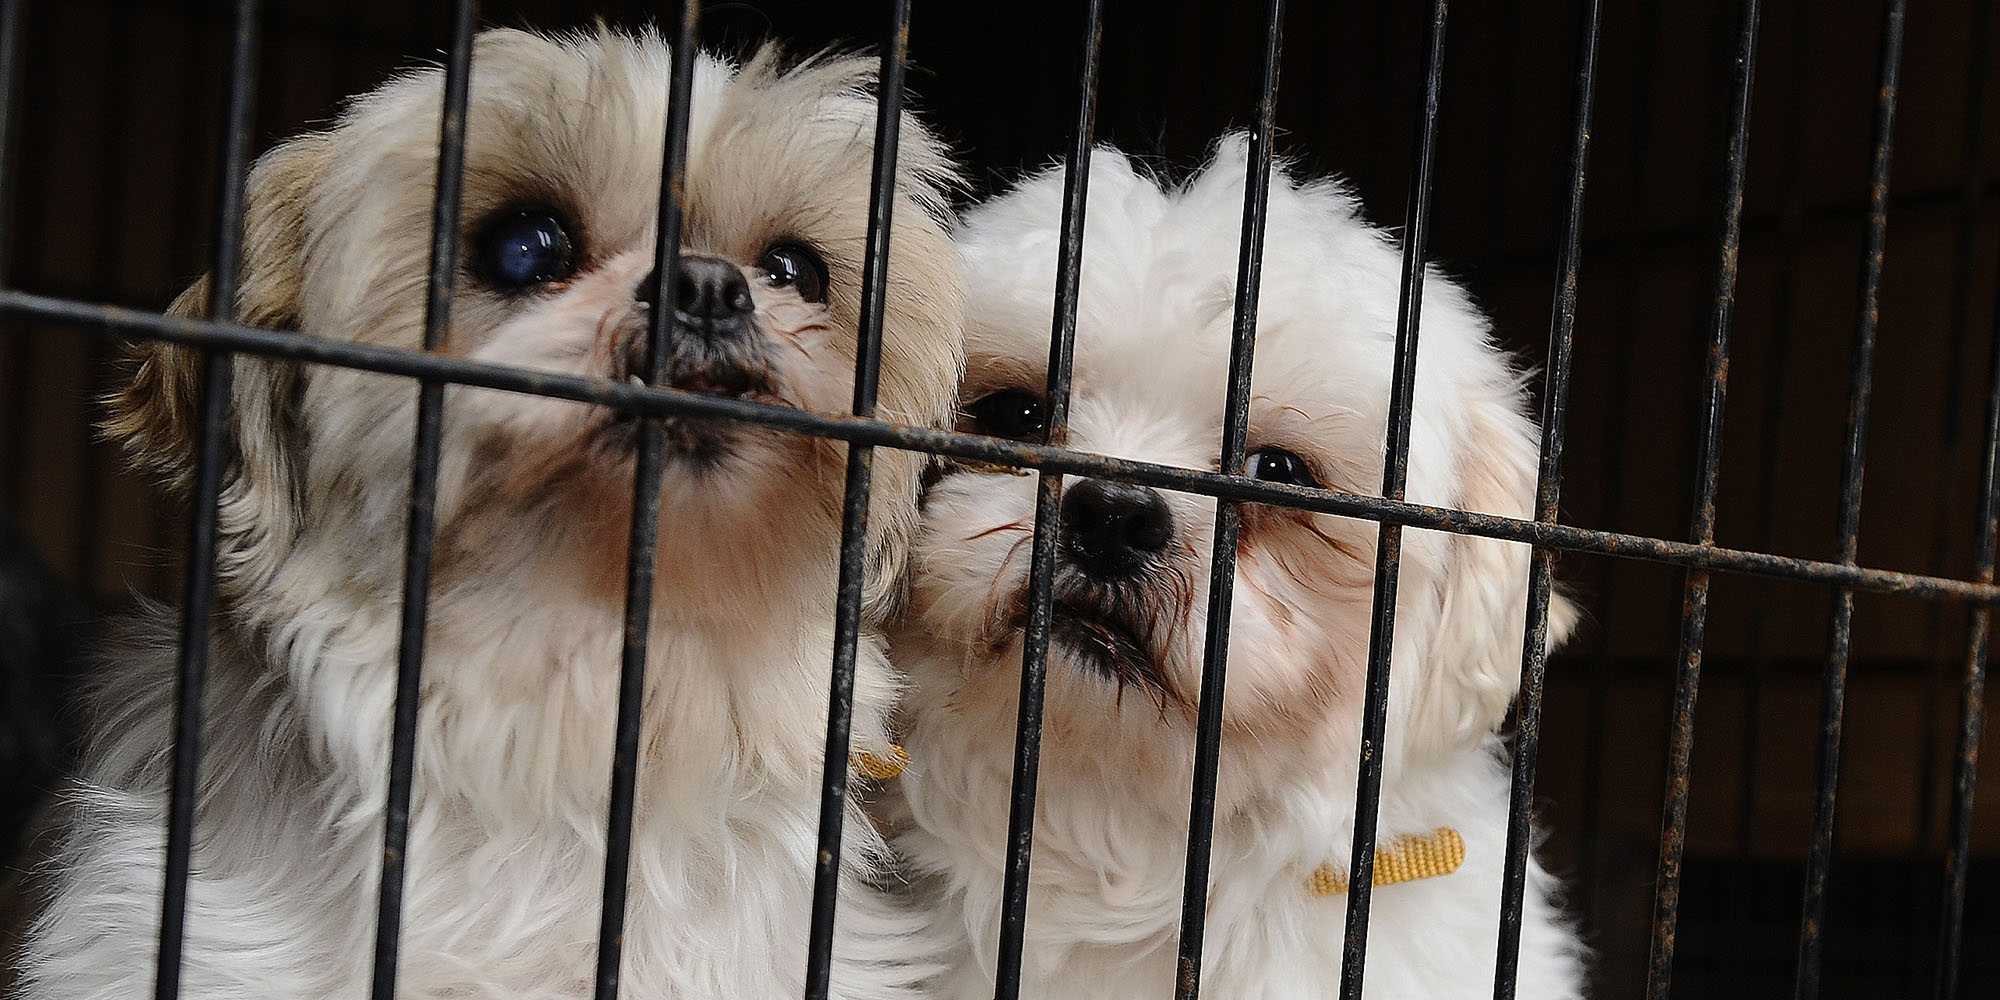 Dog lovers rejoice! California could be the first state to ban puppy mills